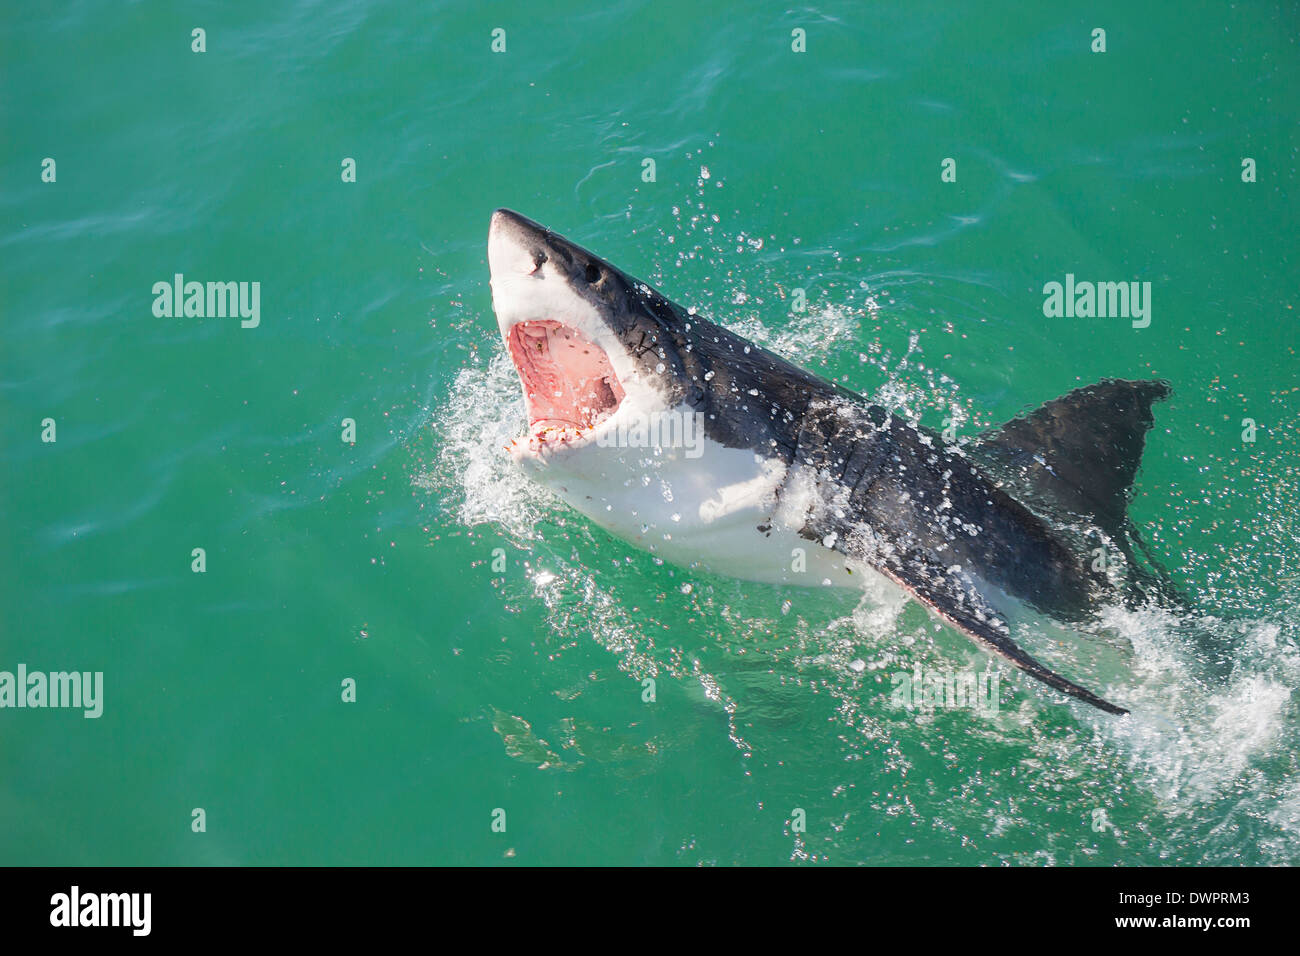 A Great White Shark breaching the water with its mouth open Stock Photo